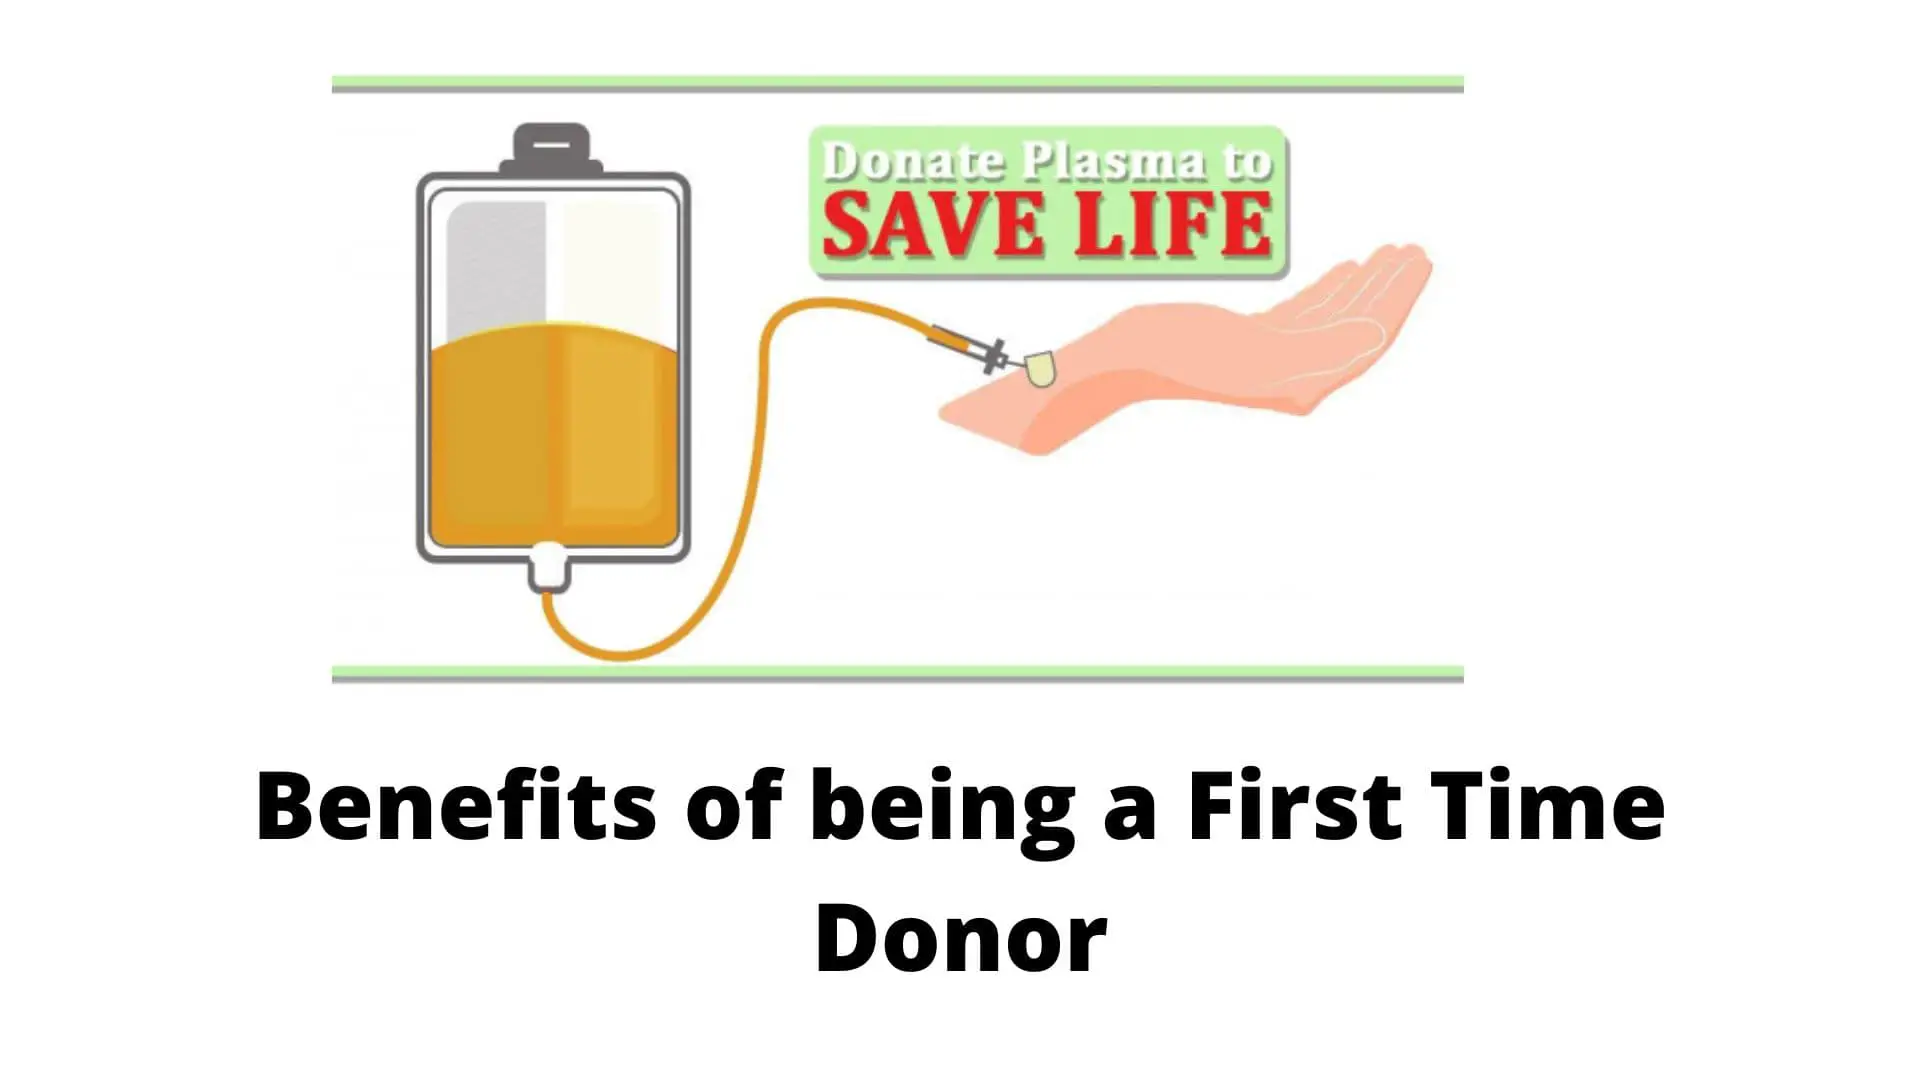 what are the benefits to donate your plasma